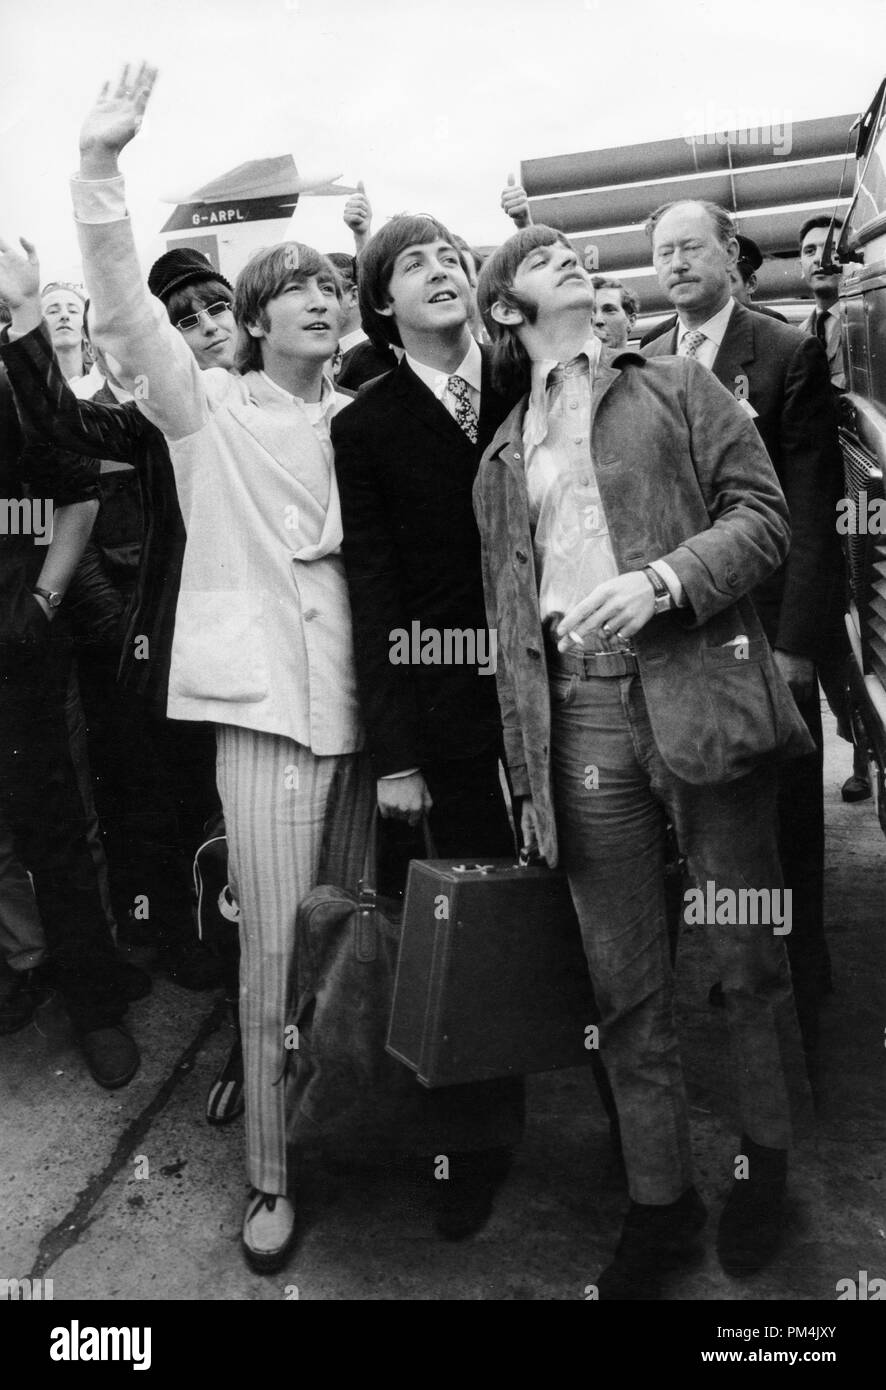 Beatles George Harrison, John Lennon, Paul McCartney and Ringo Starr,1966. File Reference #1013_093 THA © JRC /The Hollywood Archive - All Rights Reserved. Stock Photo